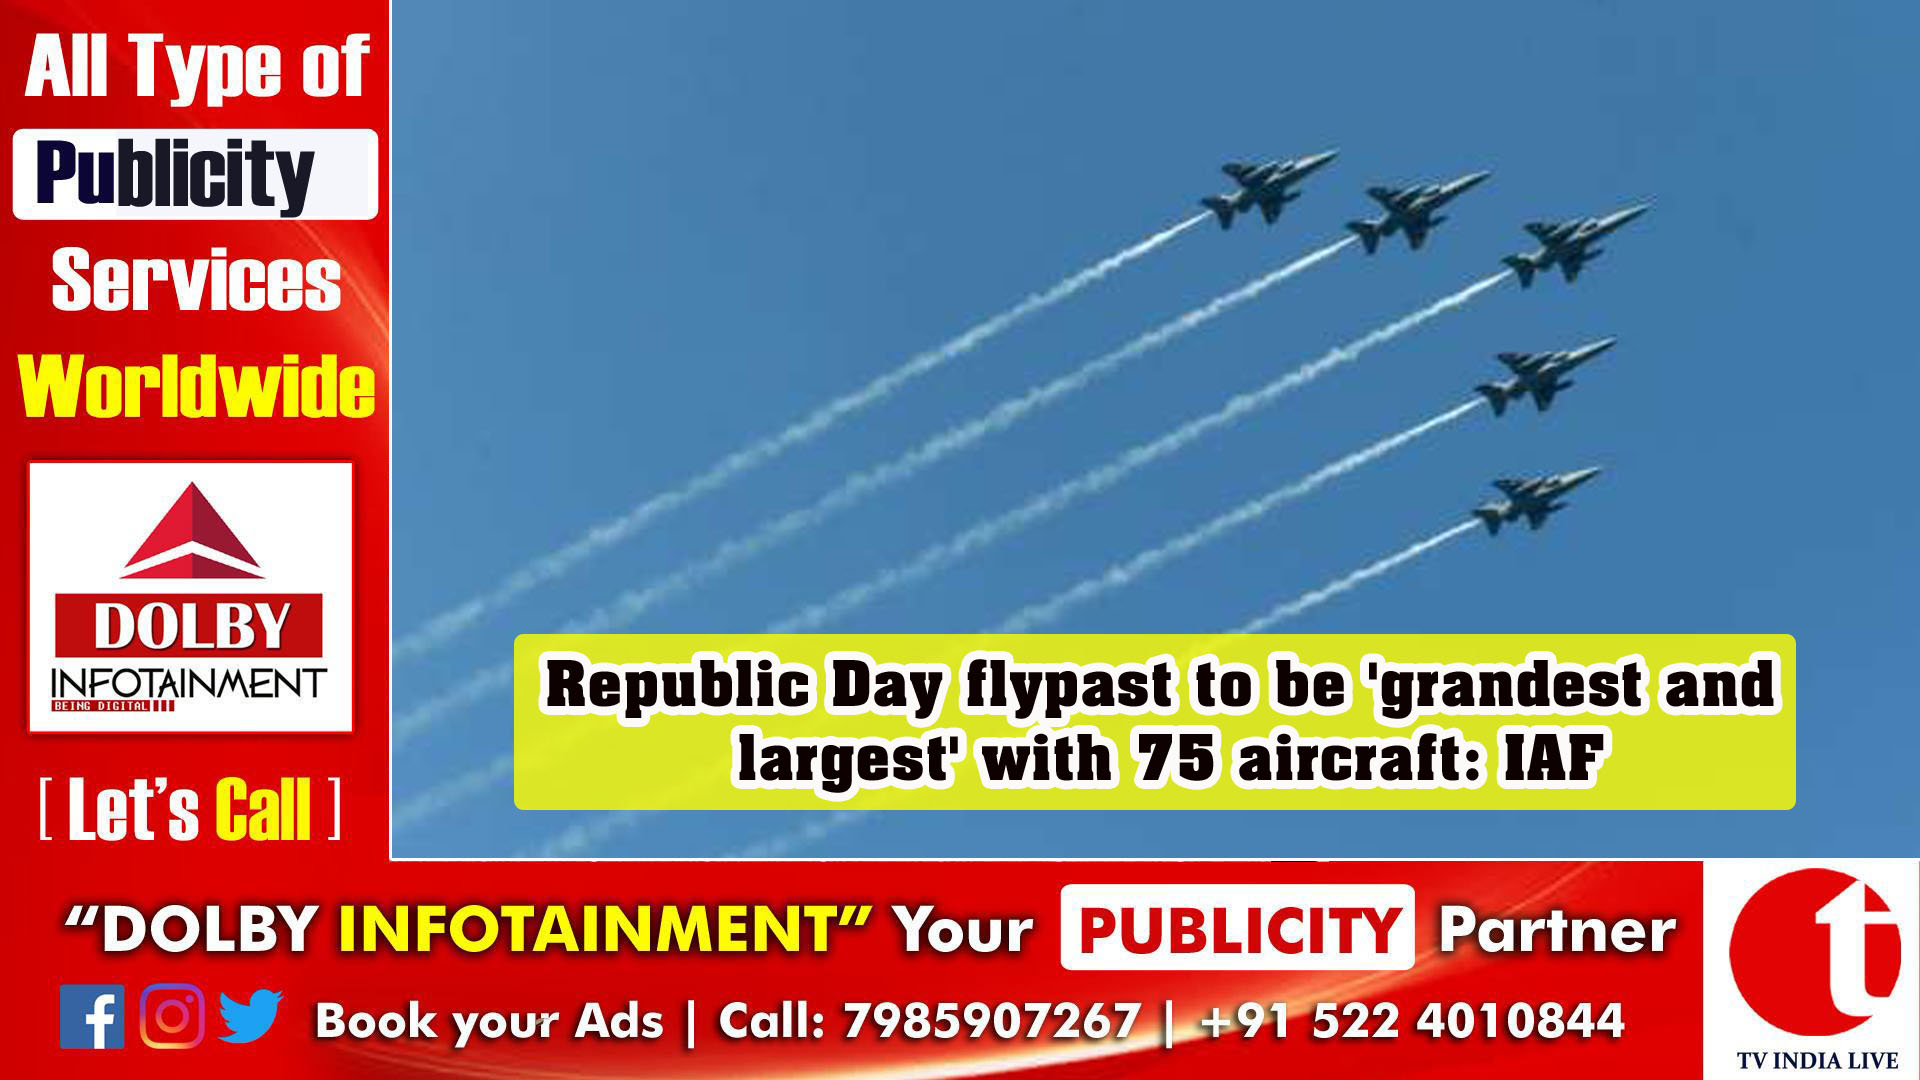 Republic Day flypast to be 'grandest and largest' with 75 aircraft: IAF